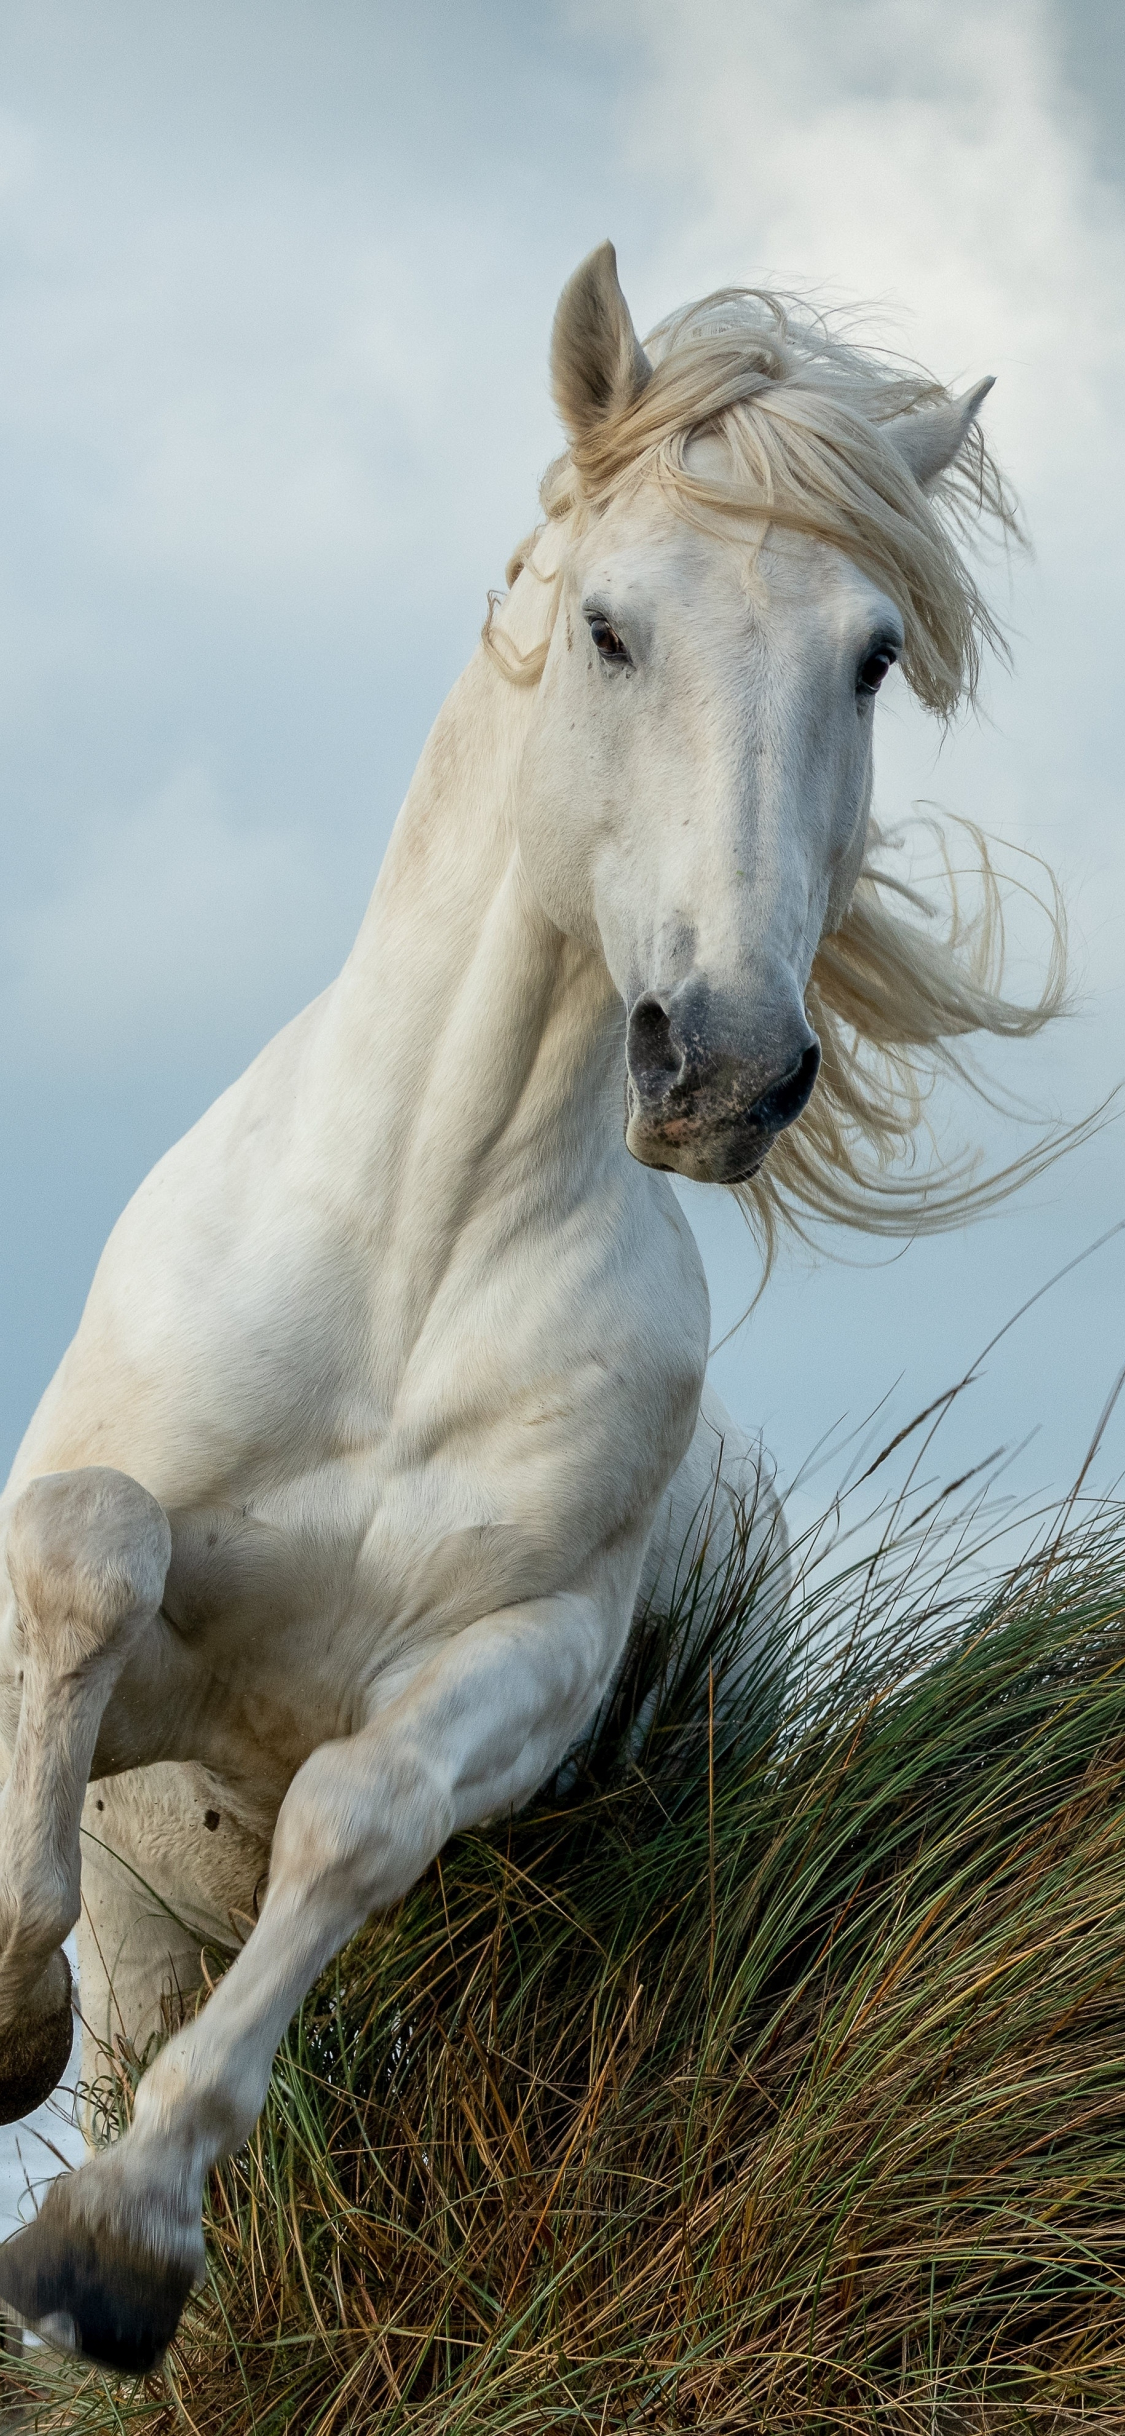 Download white horse, run, animal 1125x2436 wallpaper, iphone x, 1125x2436 HD image, background, 26277